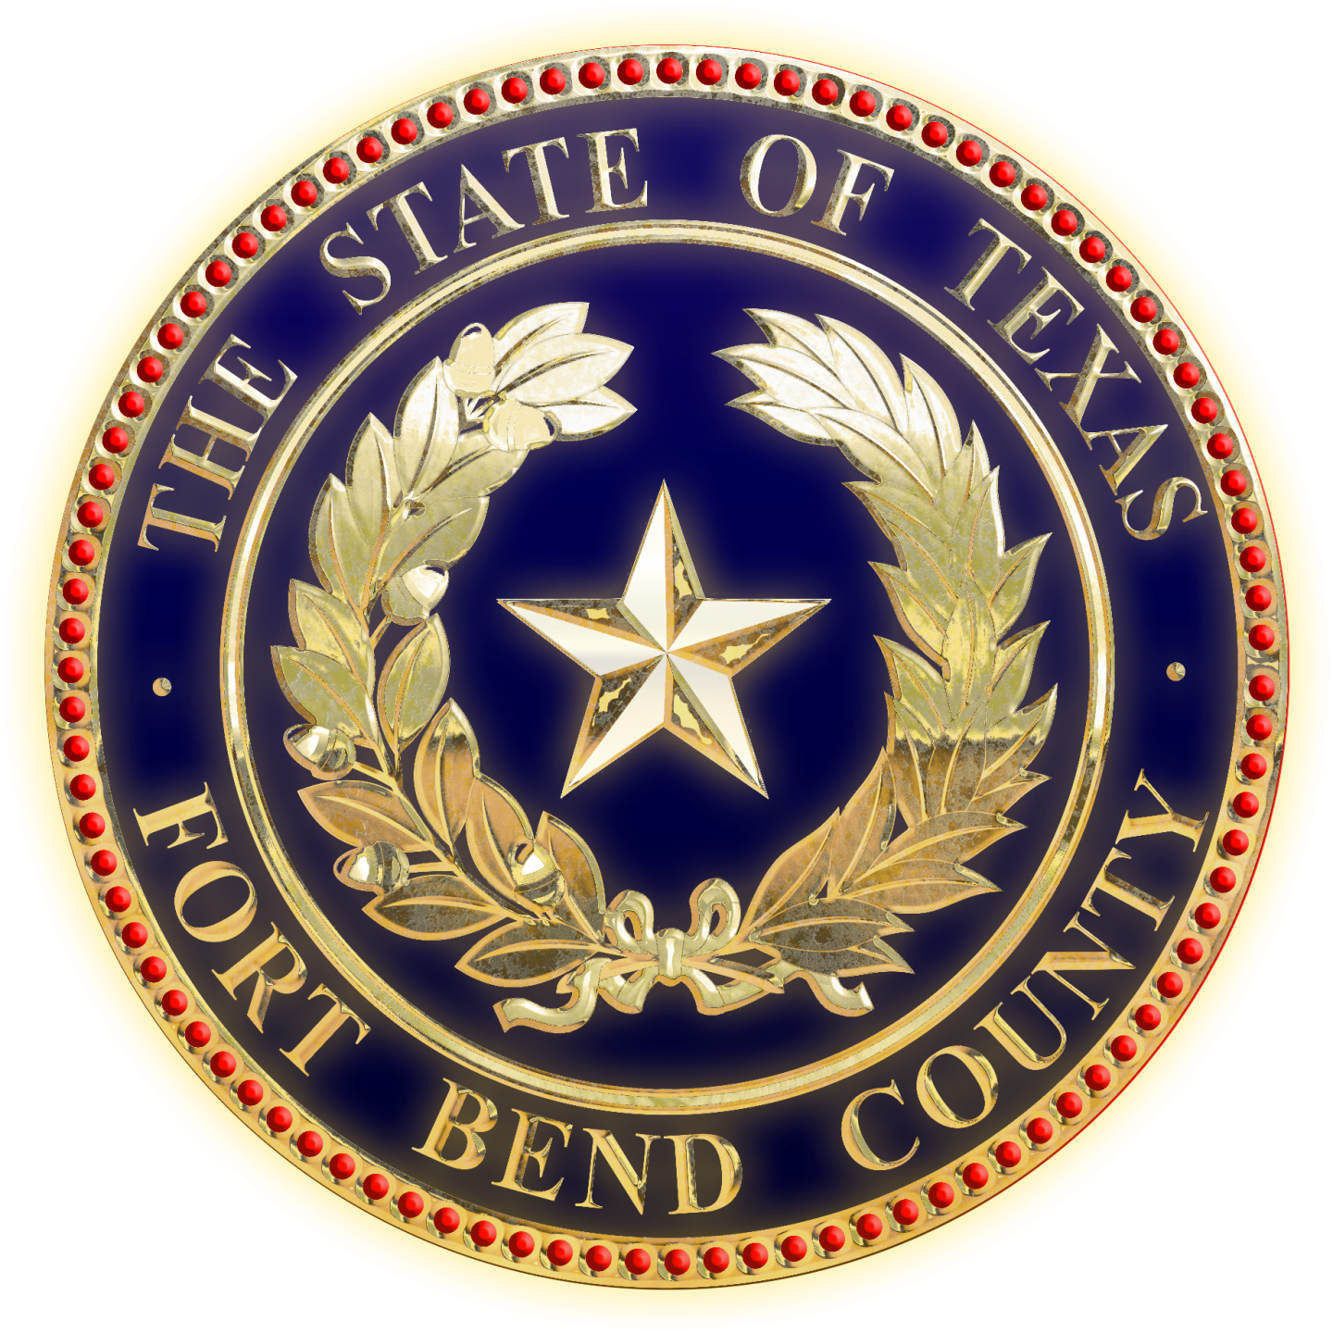 Fort Bend industrial development committee /Fort Bend County County